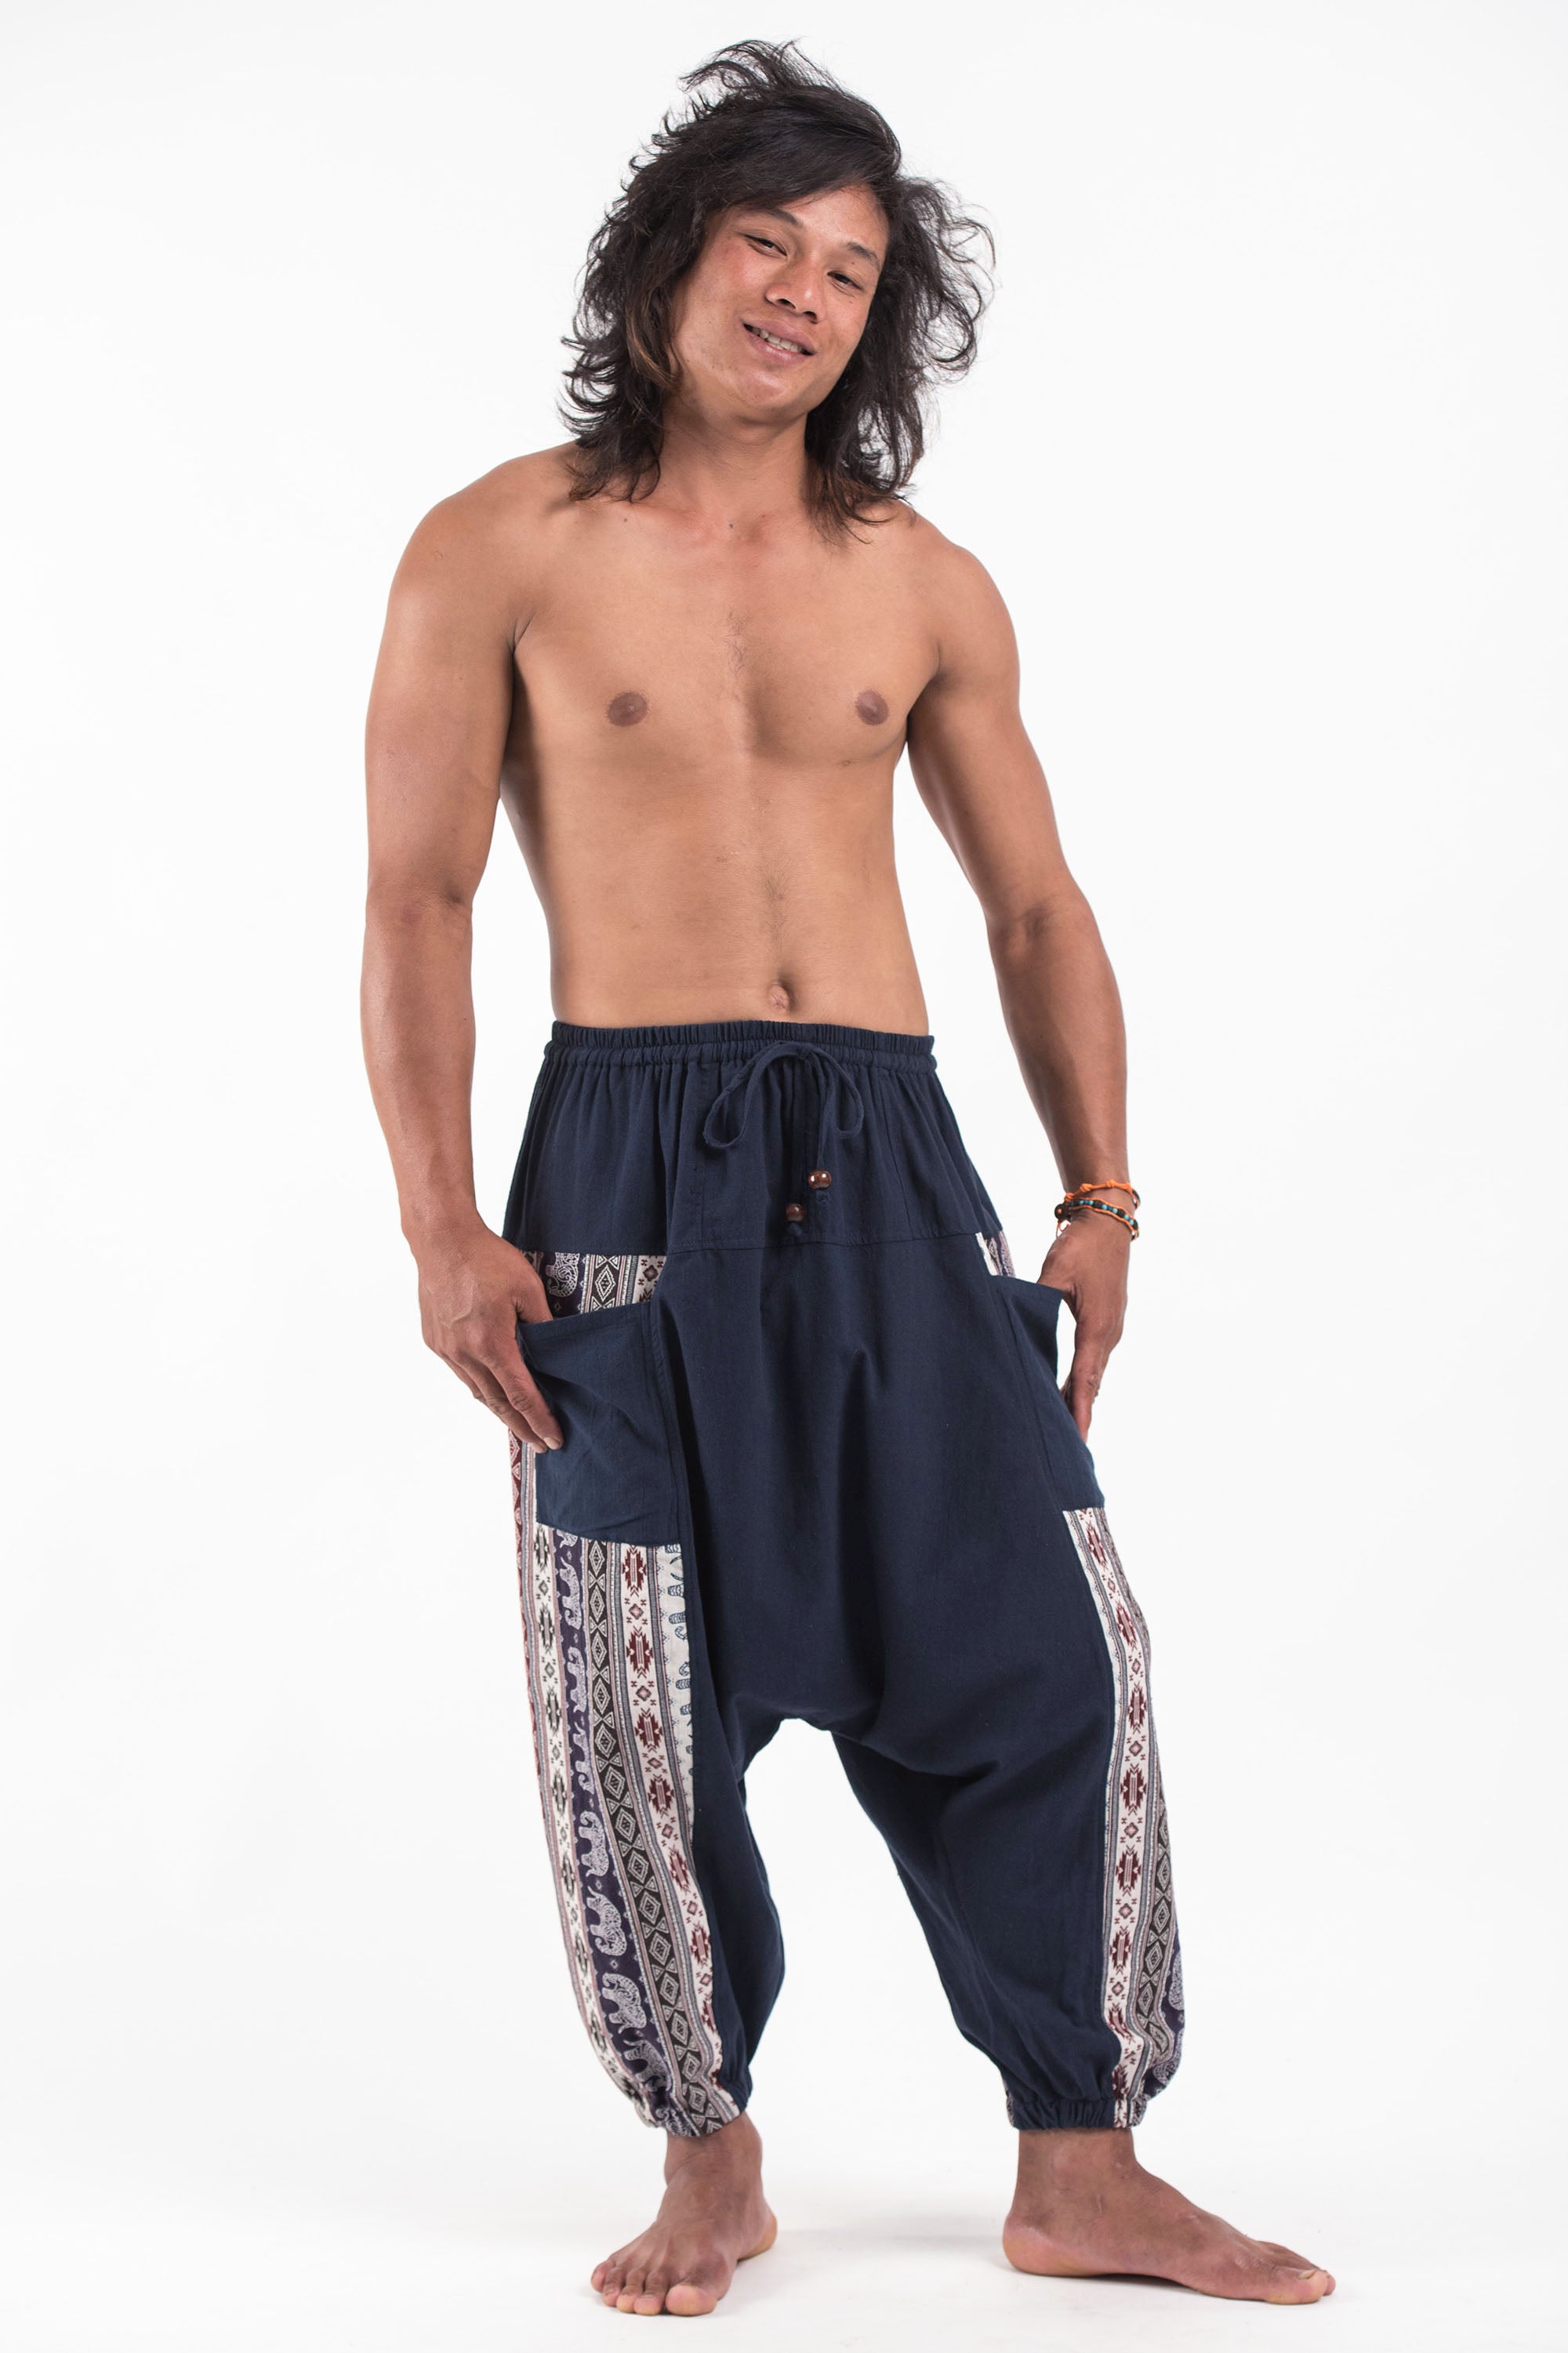 Elephant Aztec Cotton Men's Harem Pants in Navy. Free Shipping for orders $60.